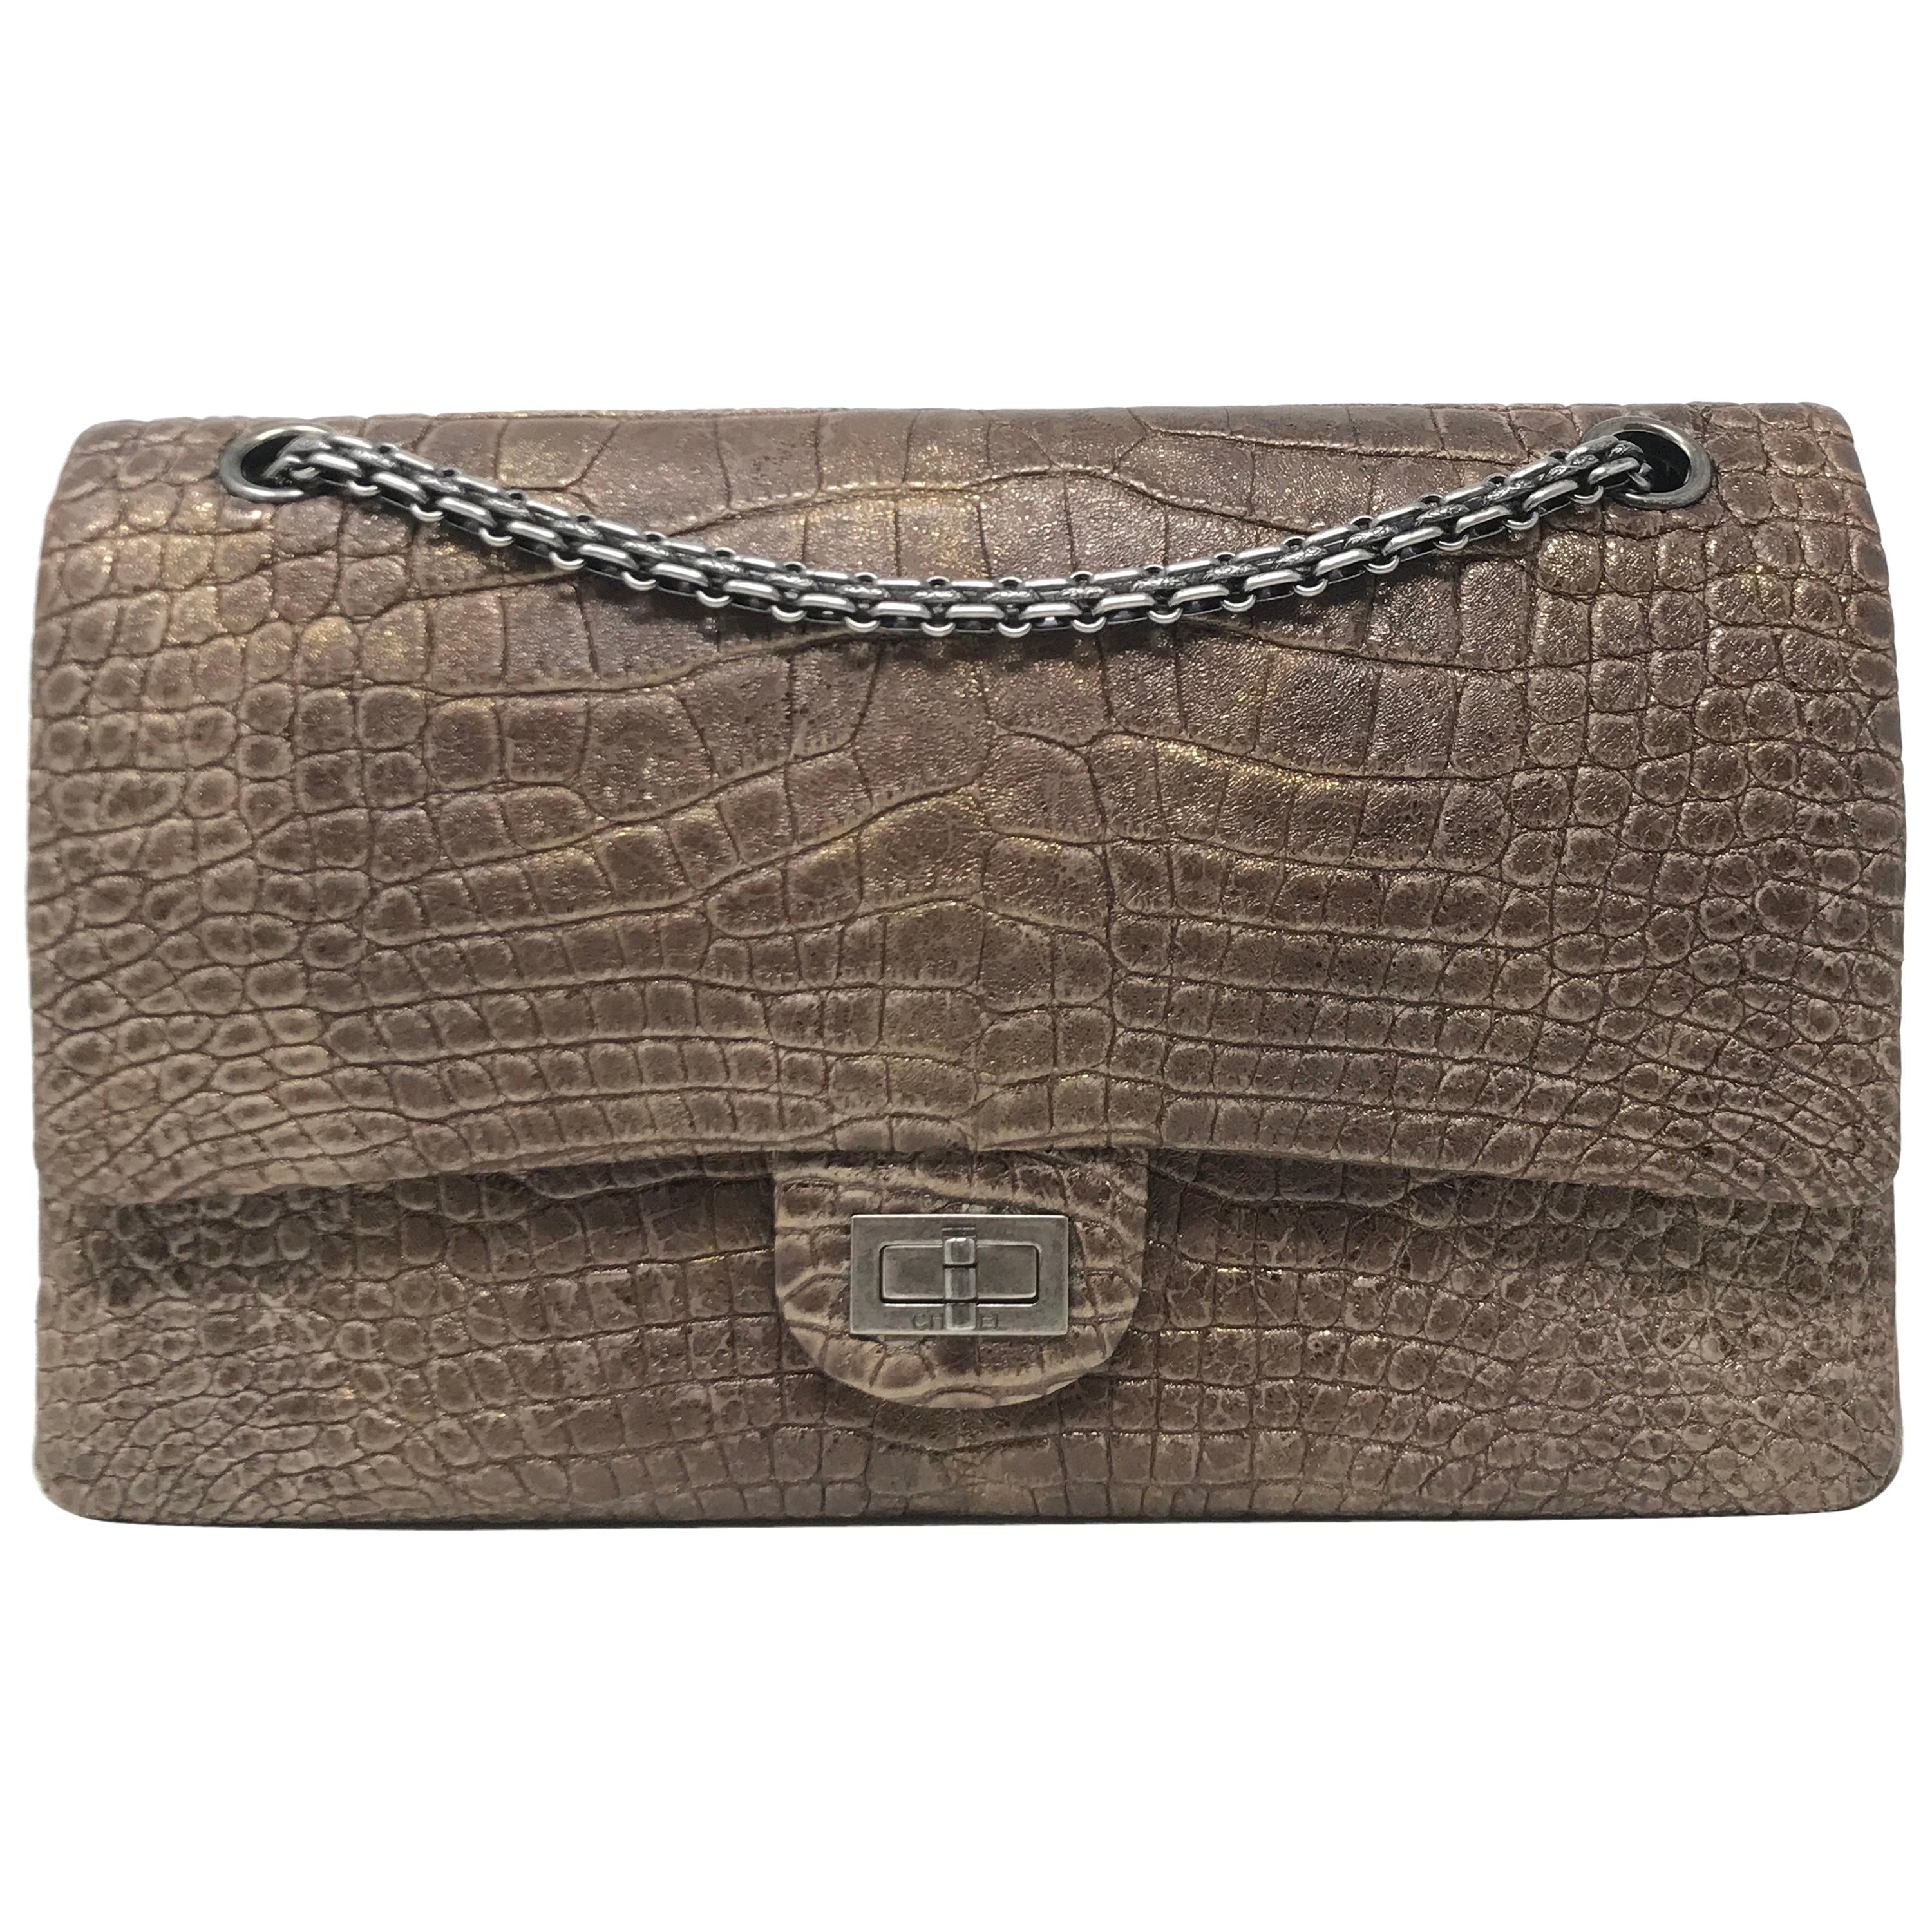 Chanel Alligator Reissue 2.55 Classic Double Flap Bag For Sale